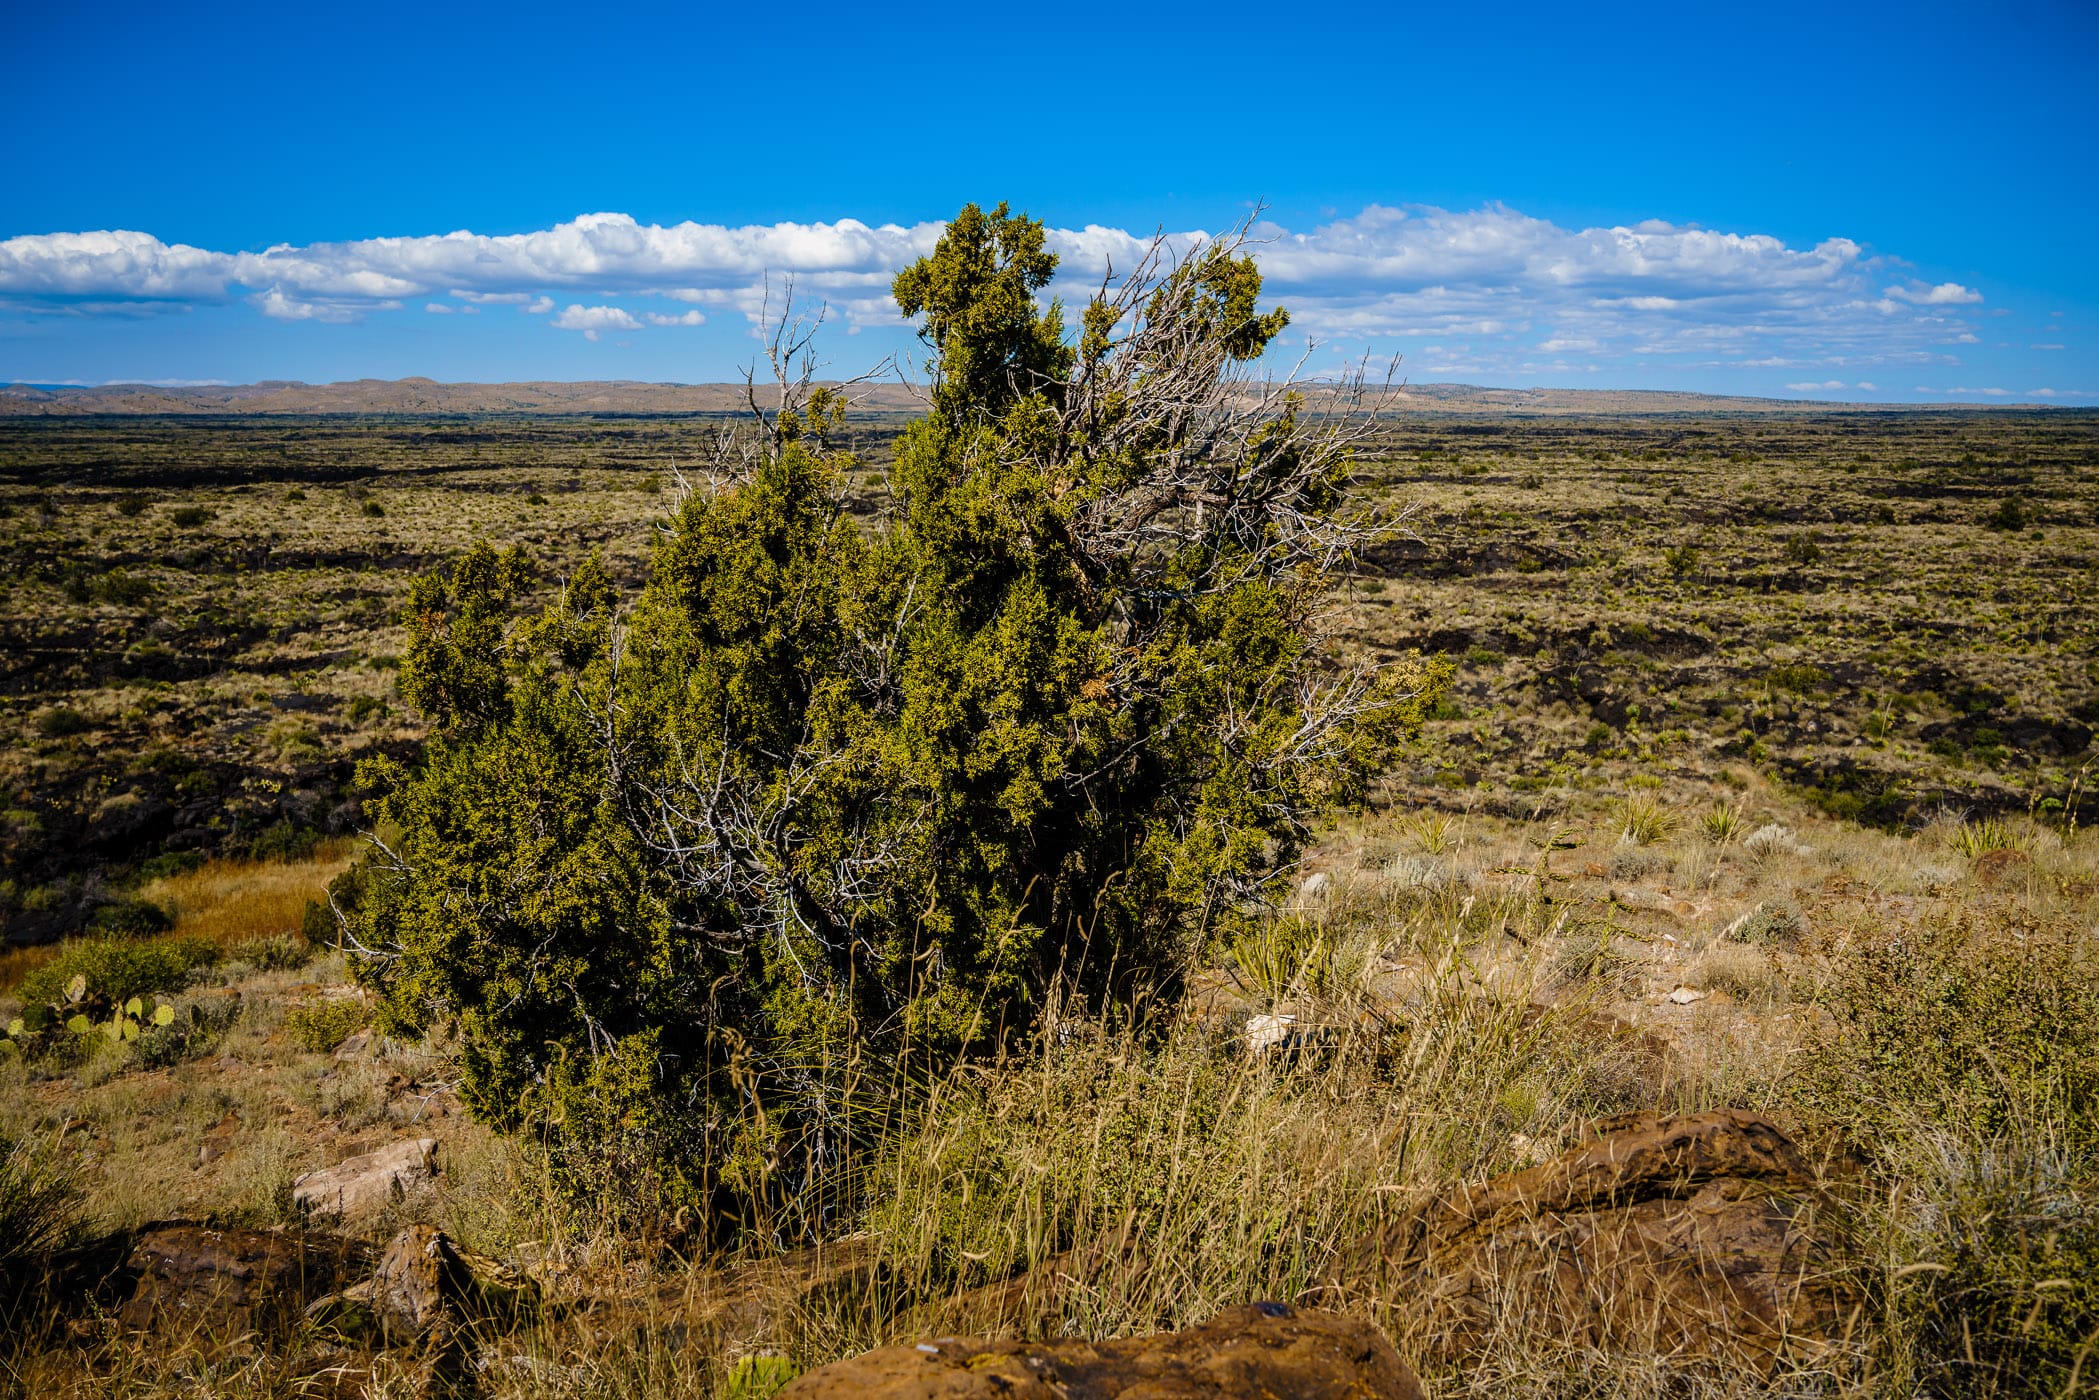 A lone tree atop a rocky hill in New Mexico's Valley of Fires.